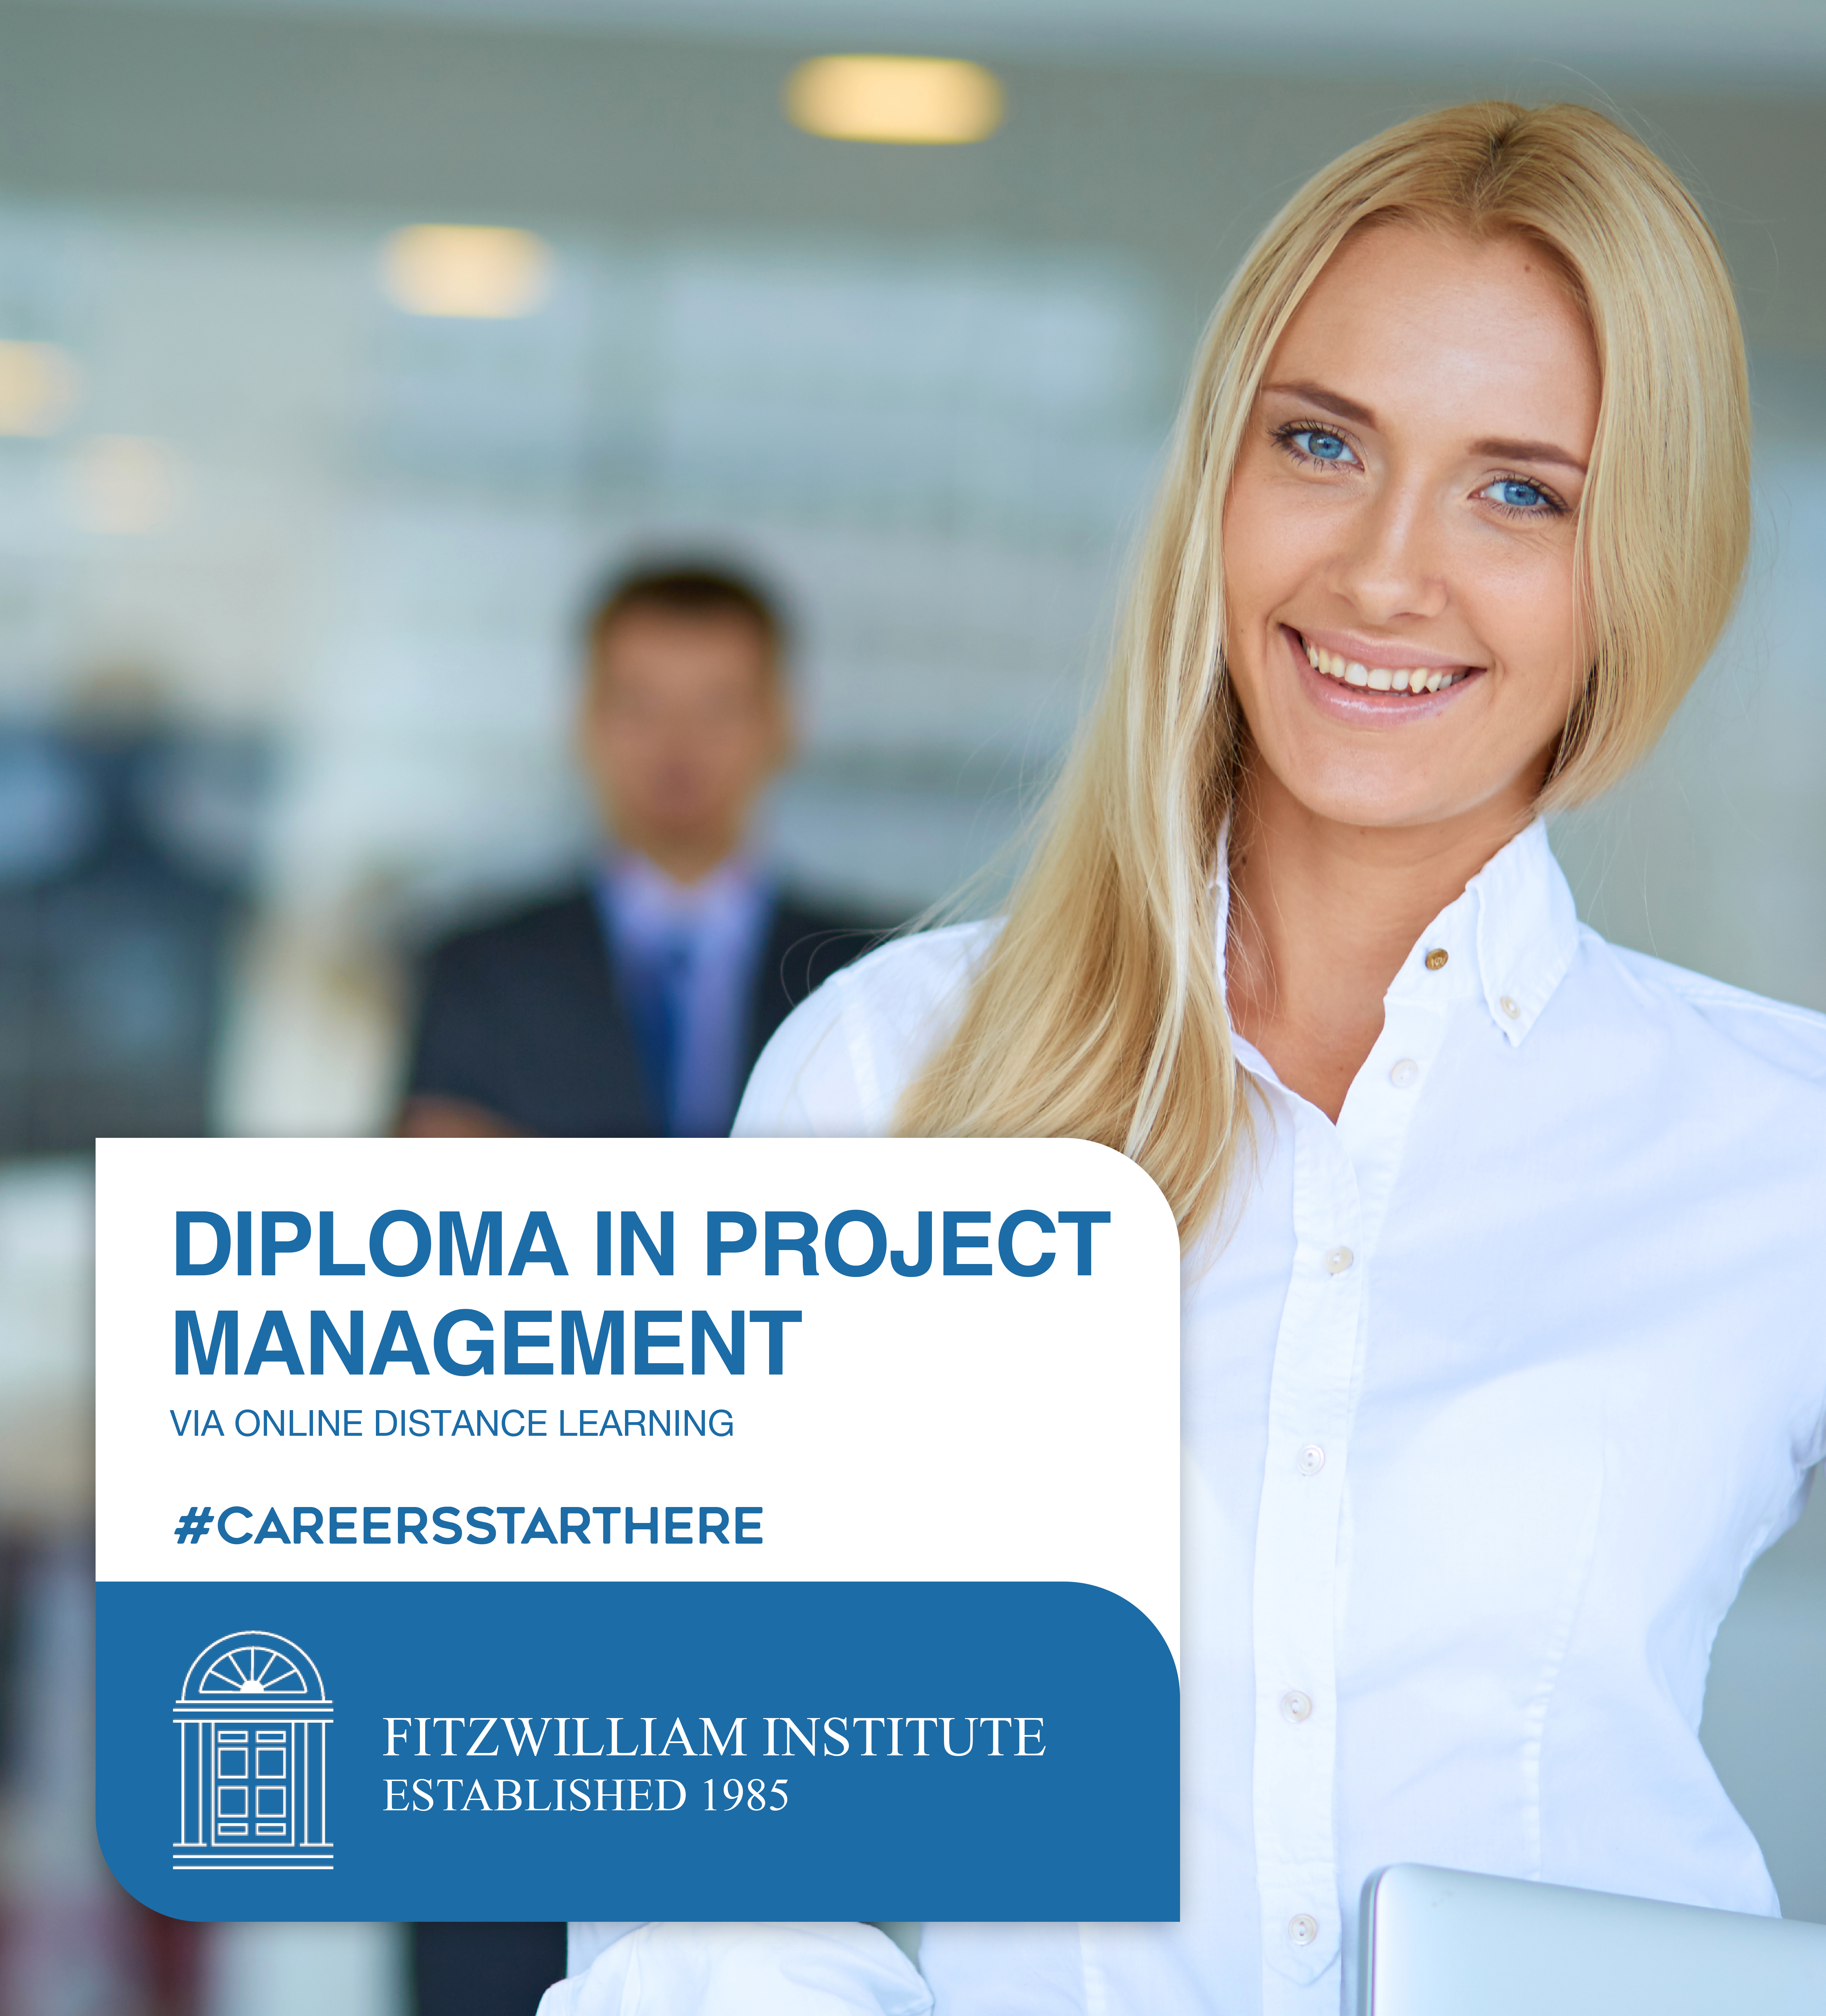 Diploma-in-Project-Management.jpg